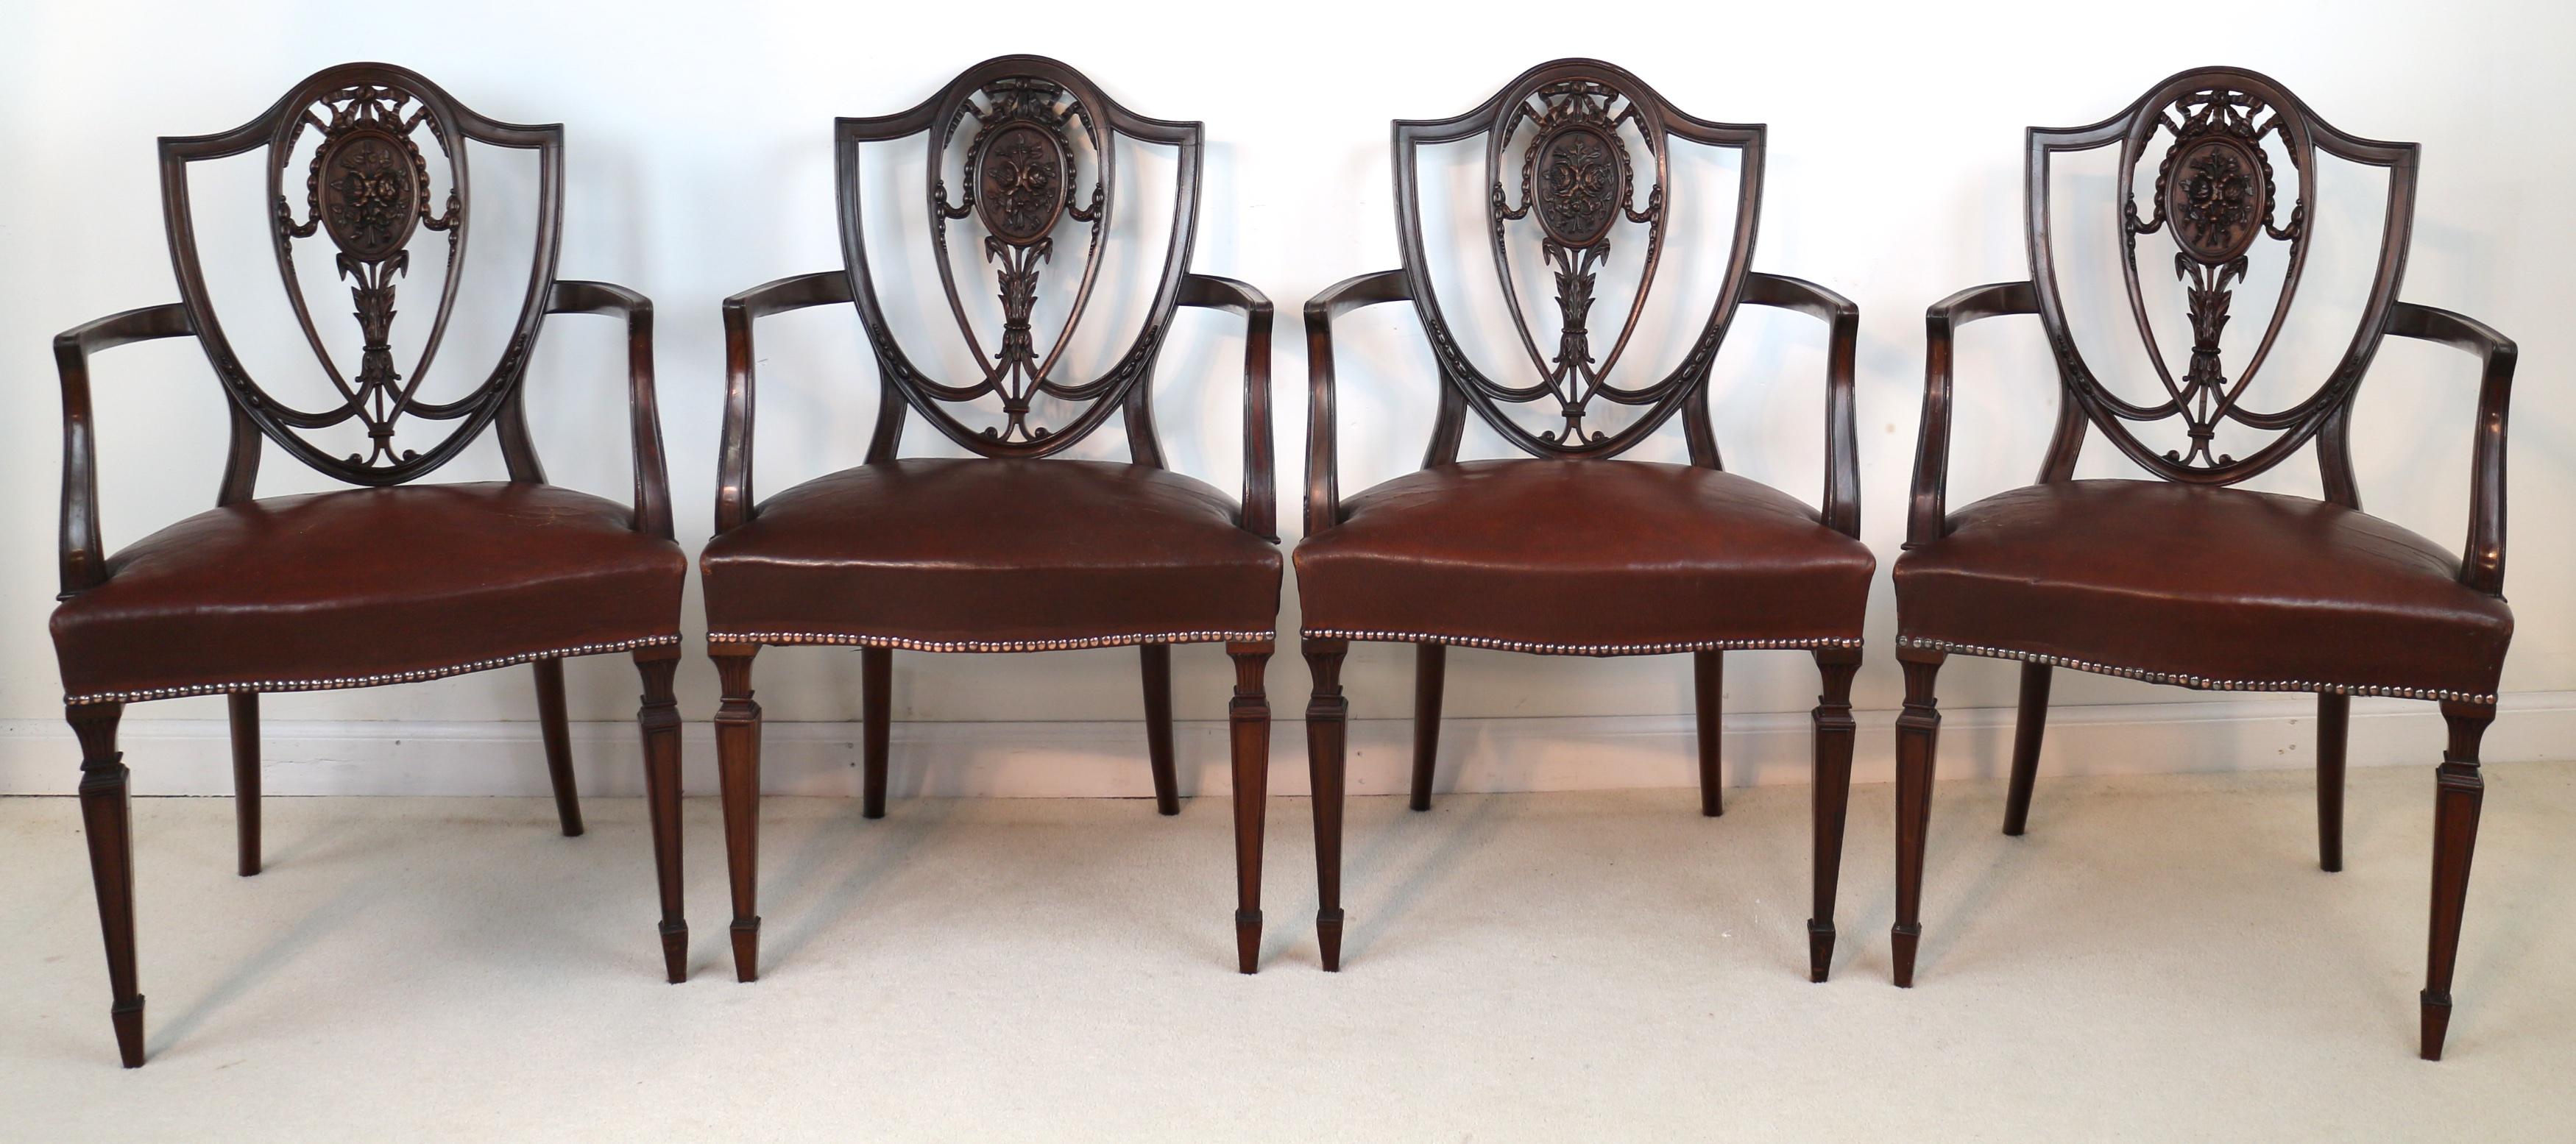 Set of 10 Antique English Victorian Hepplewhite Design Carver Dining Chairs 10